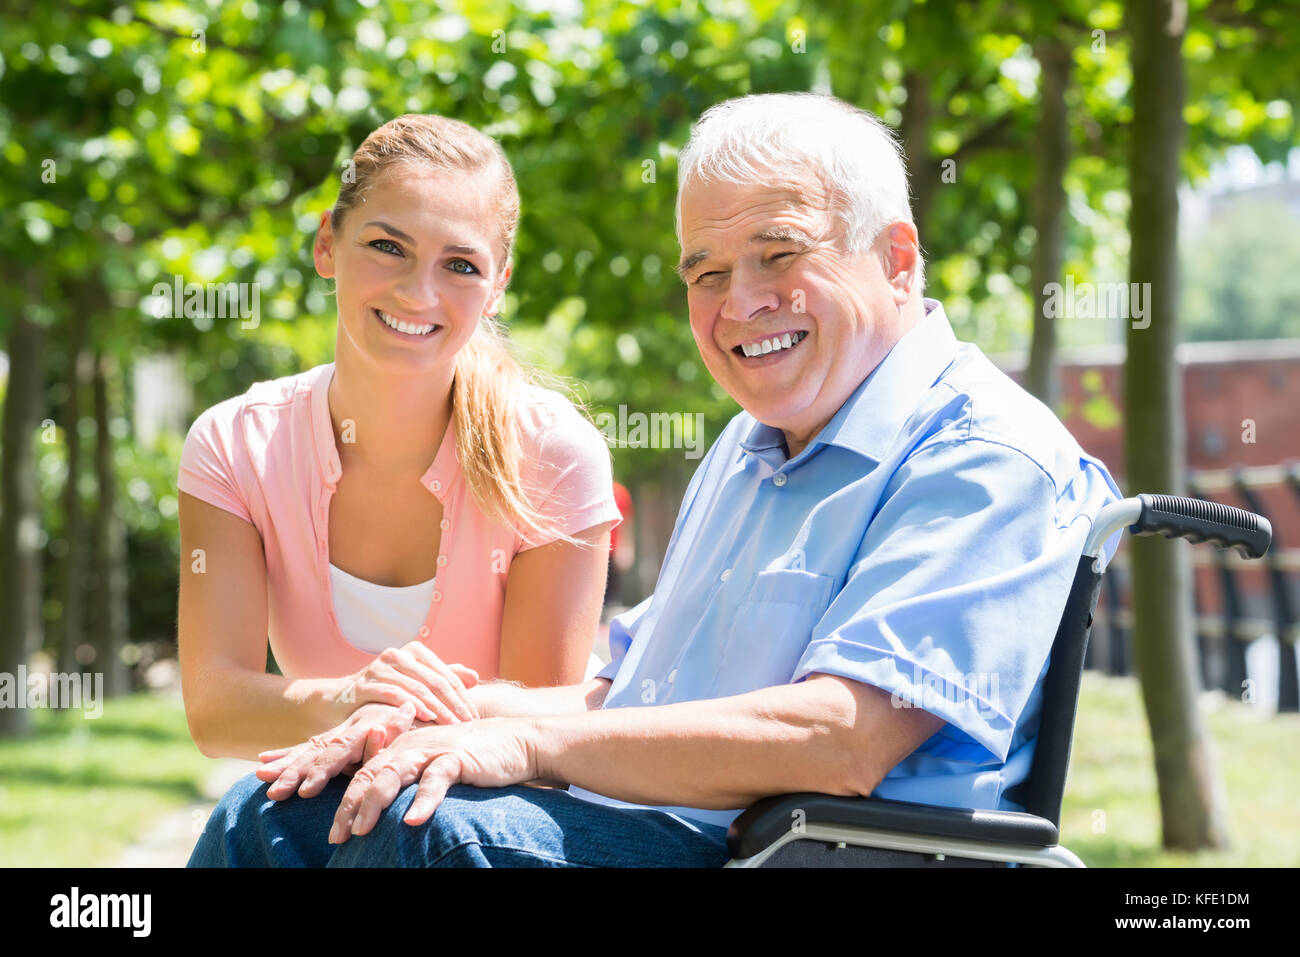 Portrait Of A Smiling Young Woman With Her Disabled Father On Wheelchair Stock Photo